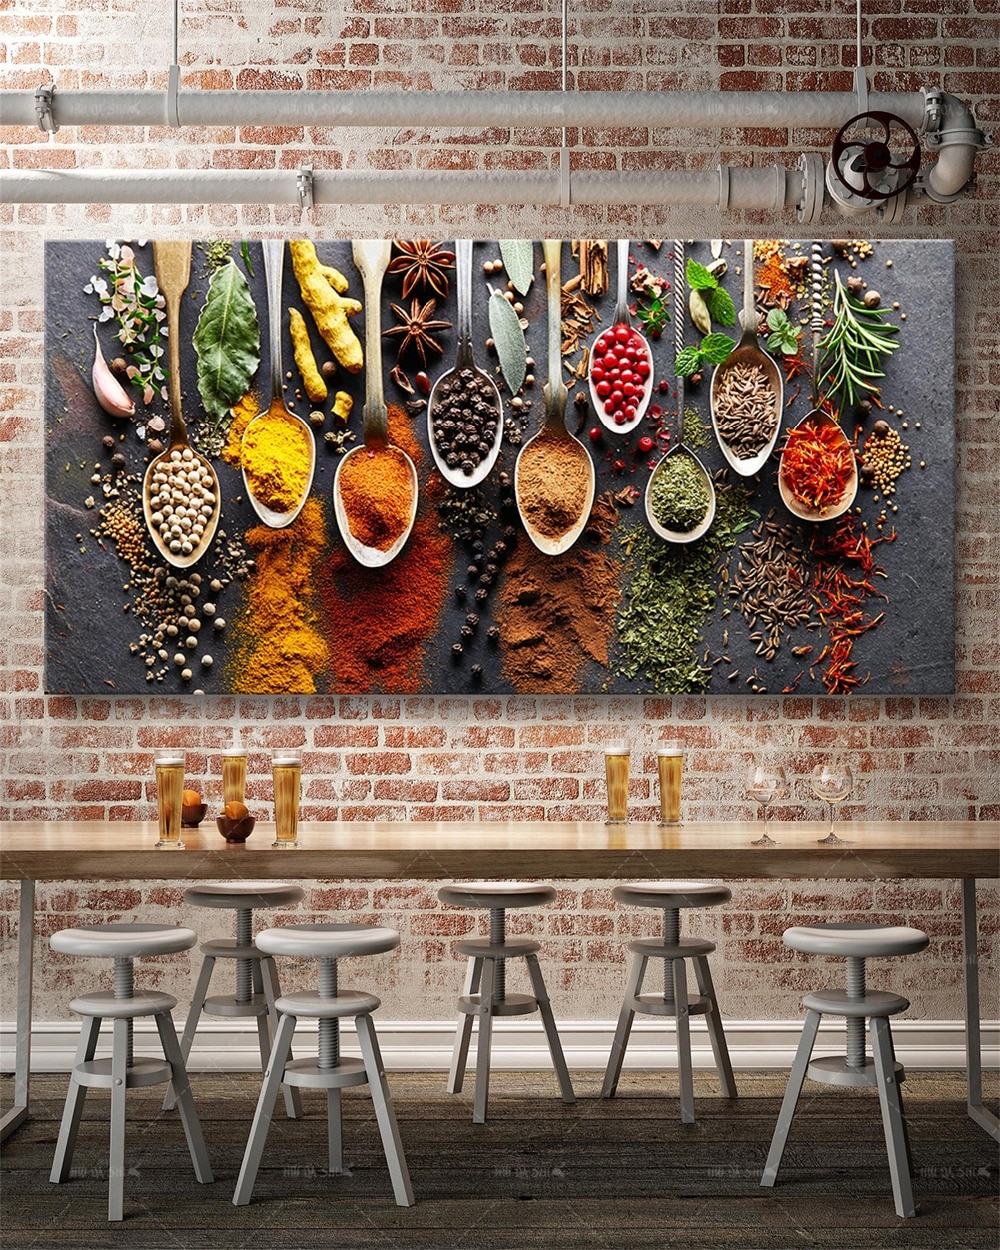 Food Painting Modern Spices Poster Canvas Modular Picture For Kitchen Restaurant Home Decoration Wall Art HD Printed NO Frame